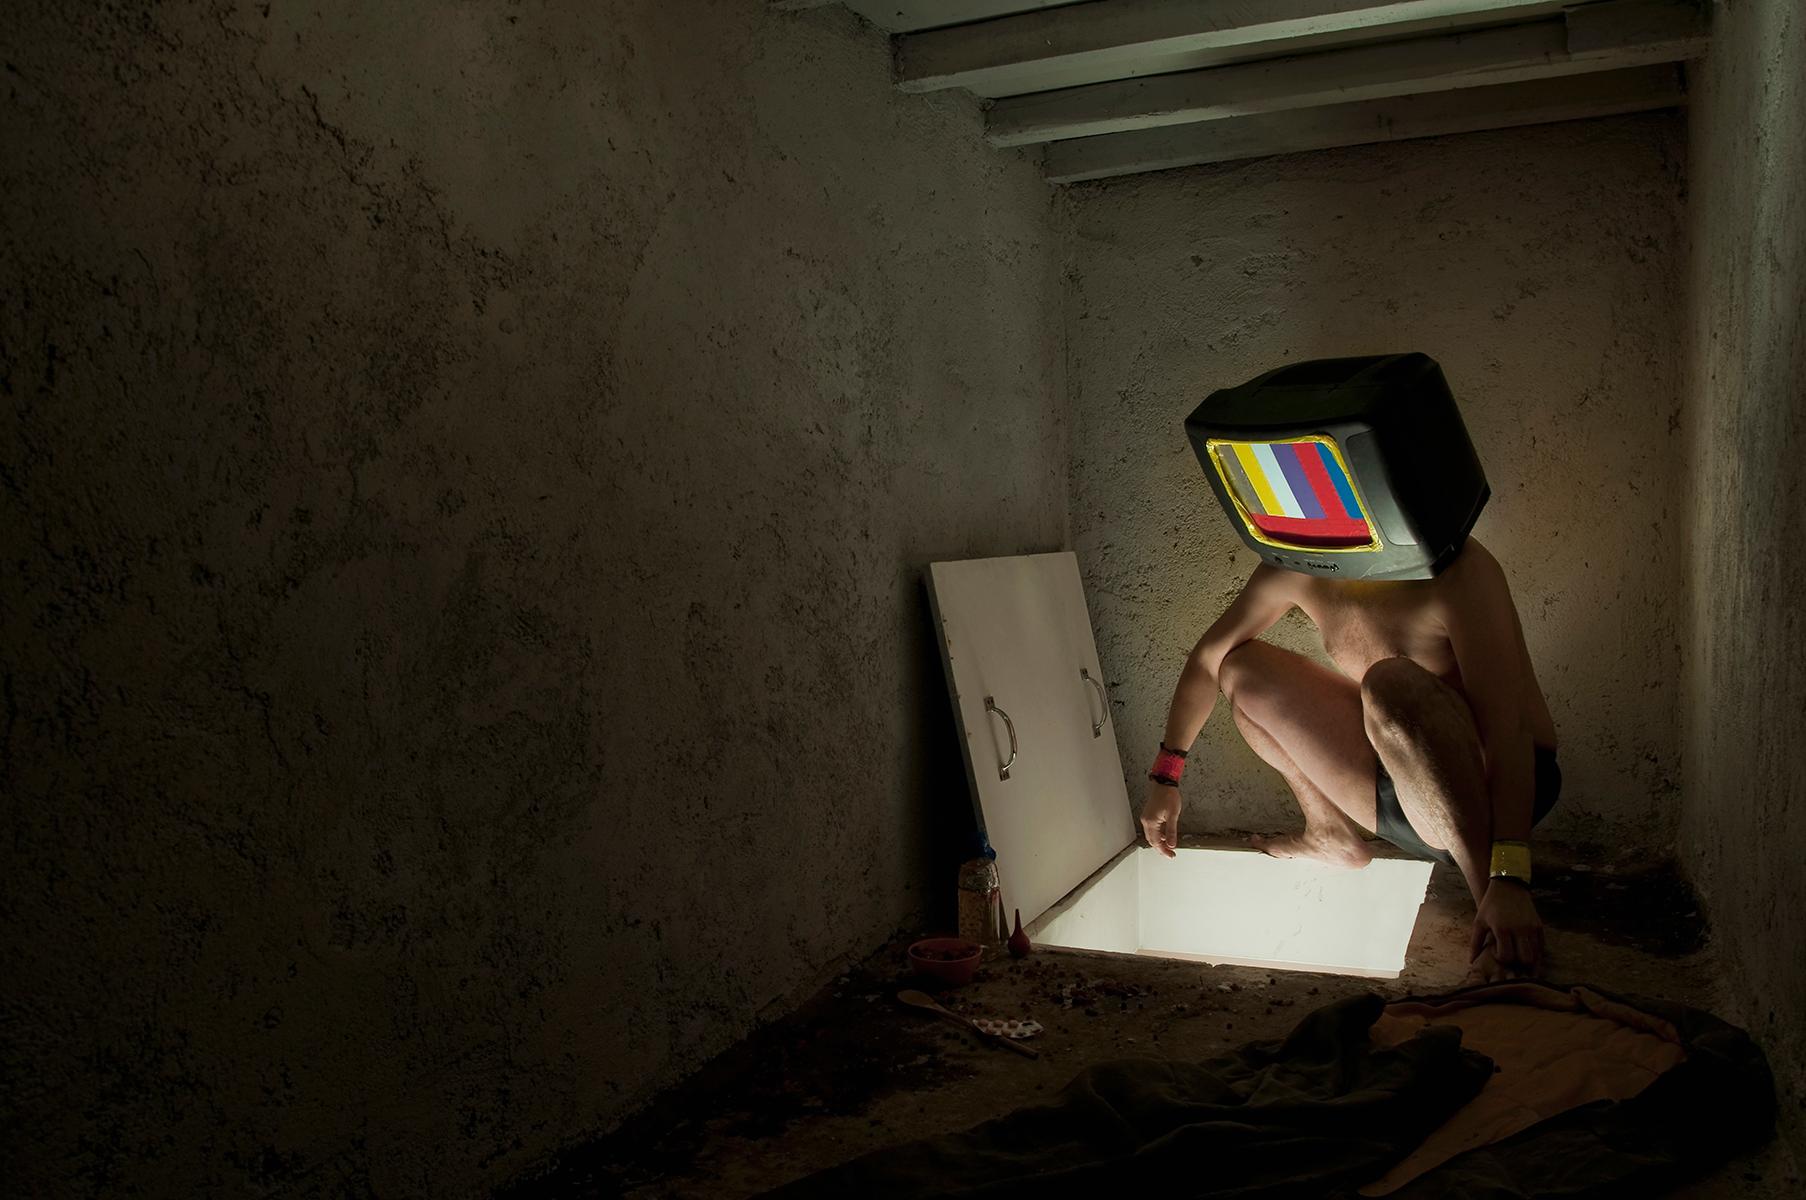 TV II. From the series Ser Cosa, Color Photograph